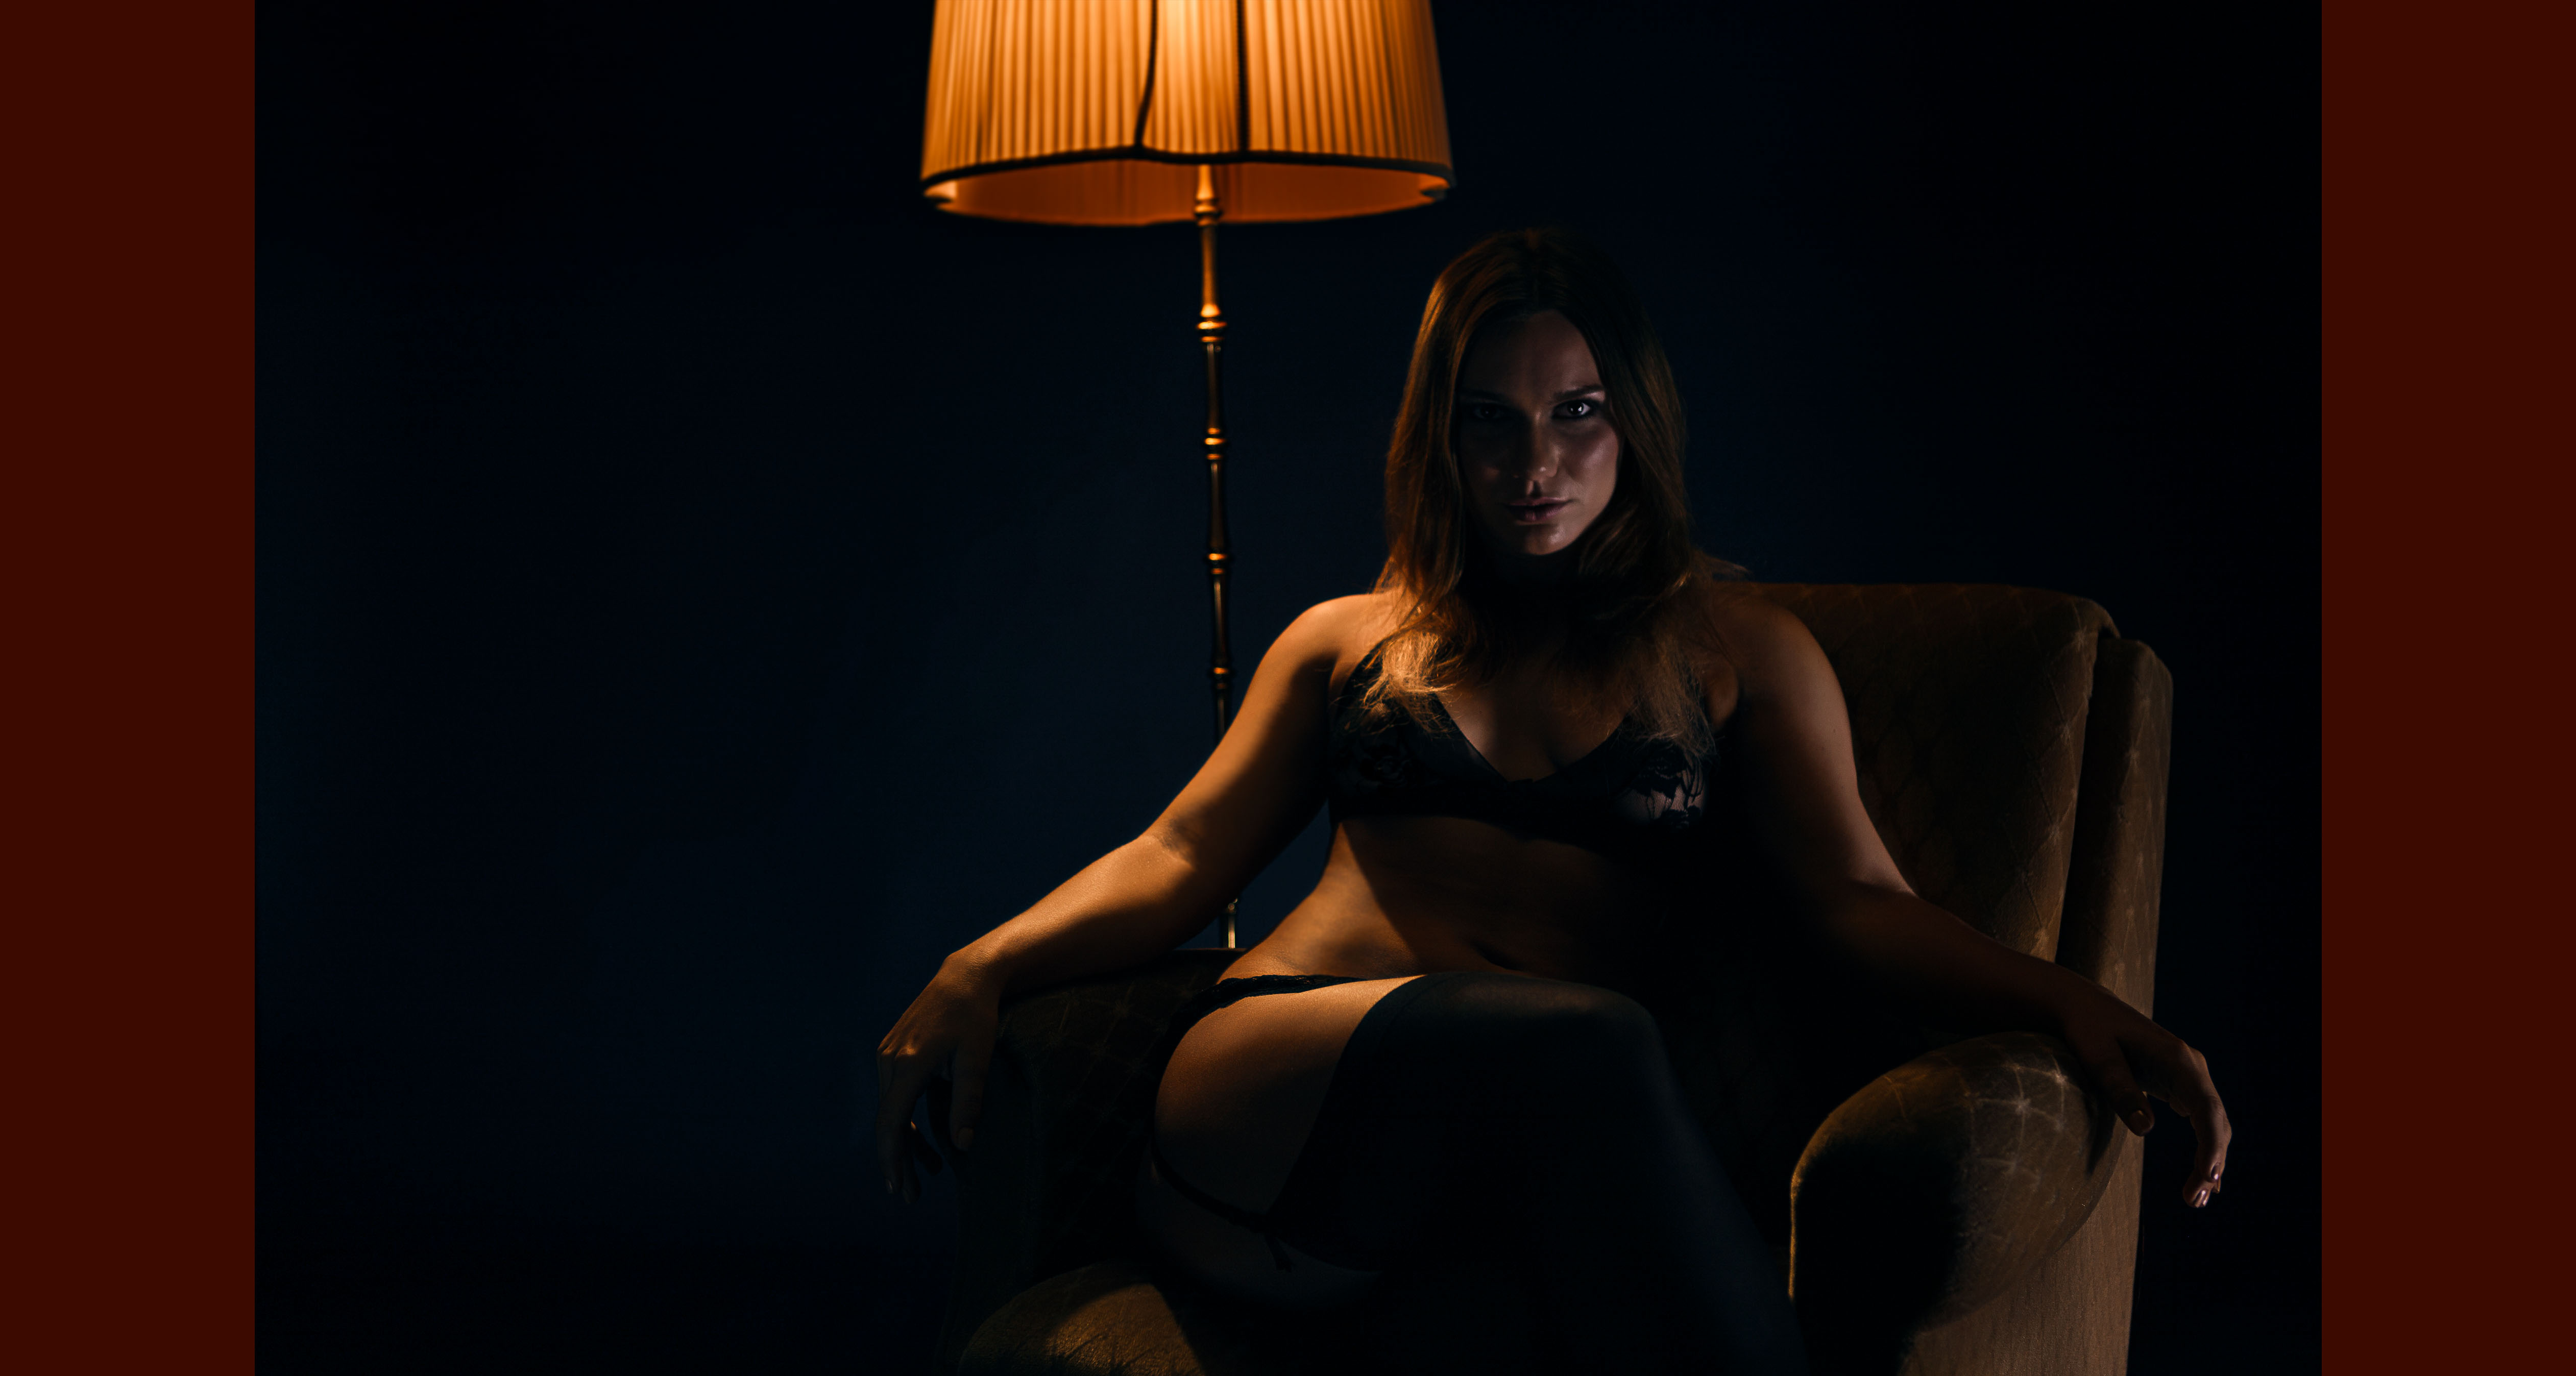 editorial & advertising photography Hamburg - Shadows and Light - MiGel Photographer - lingerie